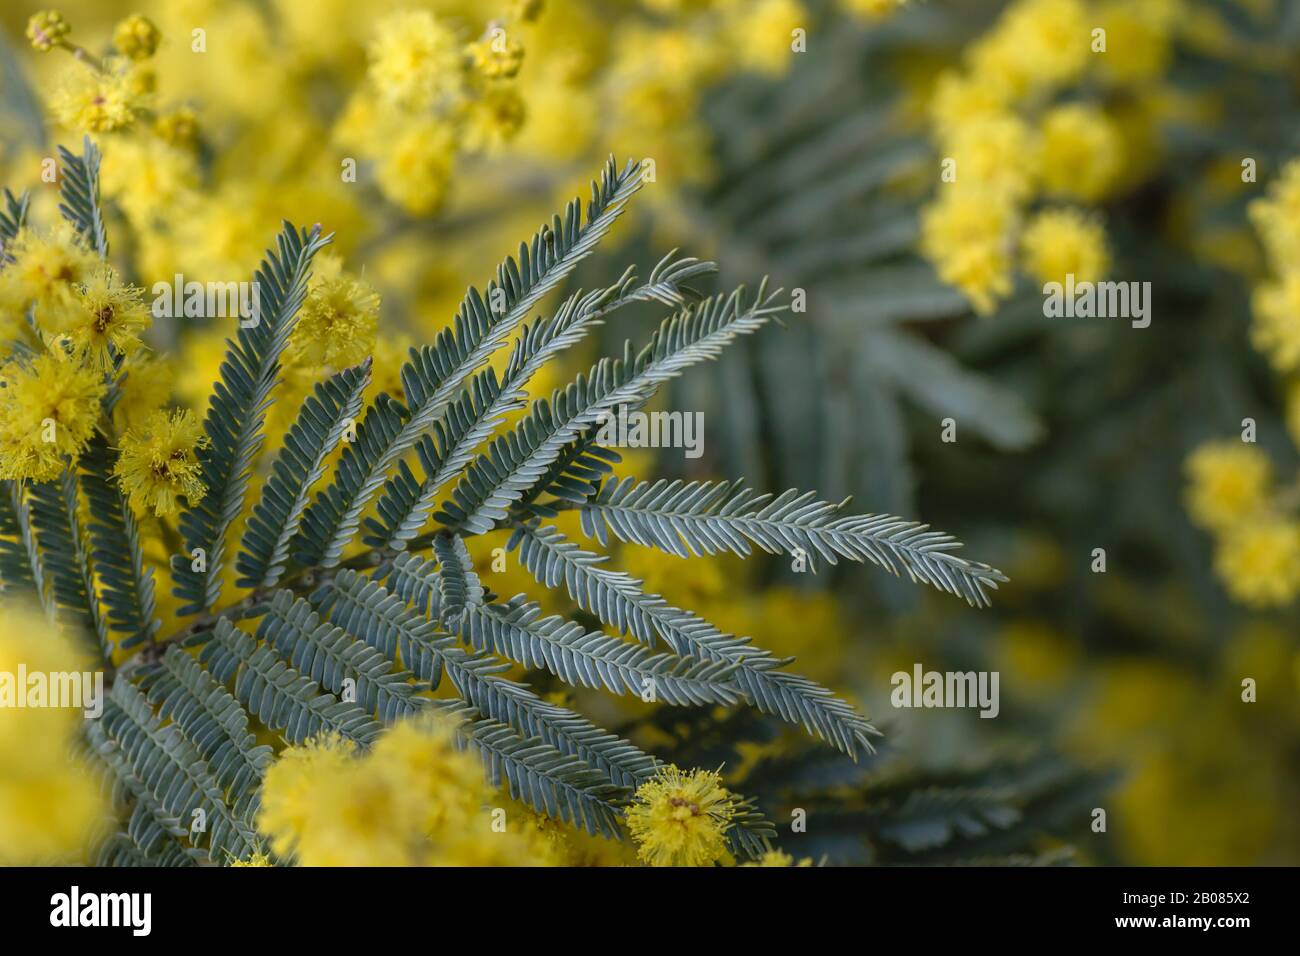 Detail of blossoming acacia dealnata silvery green leaves Stock Photo